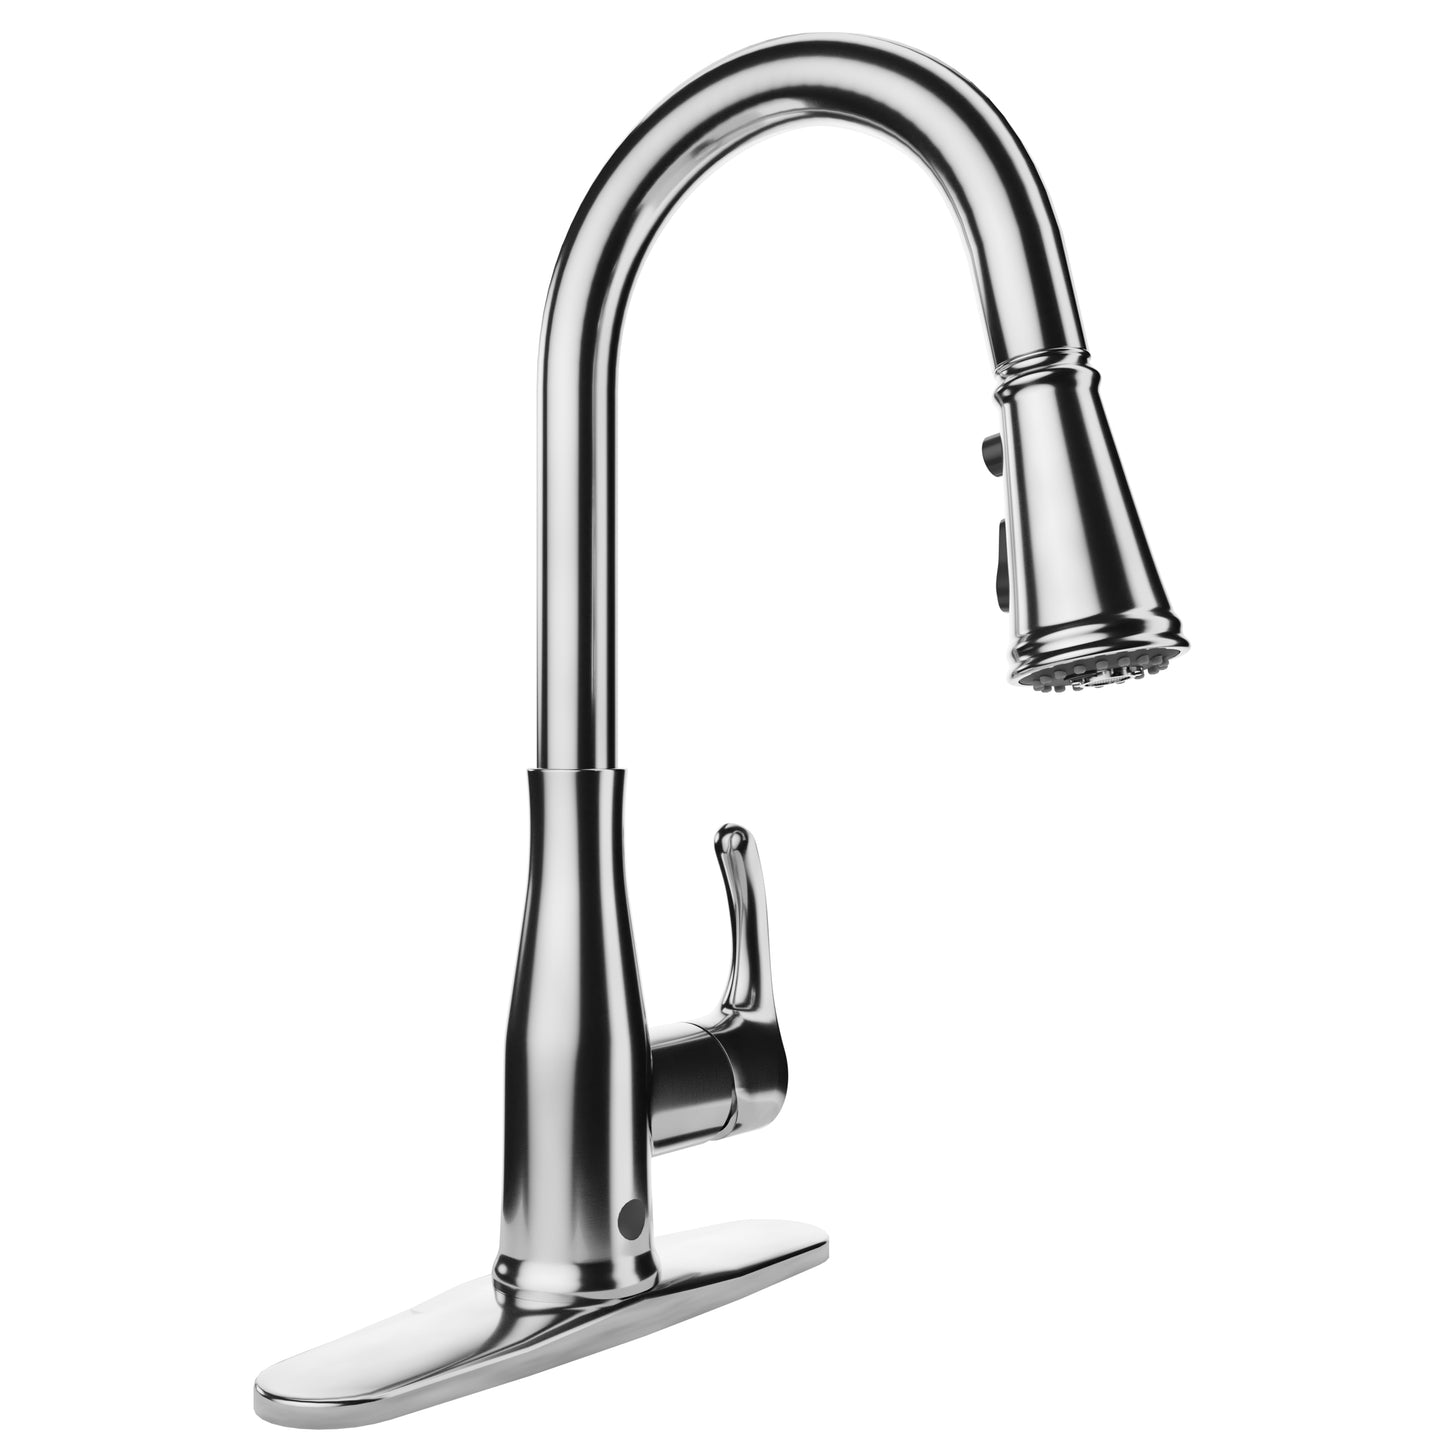 KF-AZ301SS - Sifo Hands Free Touchless 1-Handle Pull-Down Sprayer Kitchen Faucet with Motion Sense and Fan Sprayer in Stainless Steel